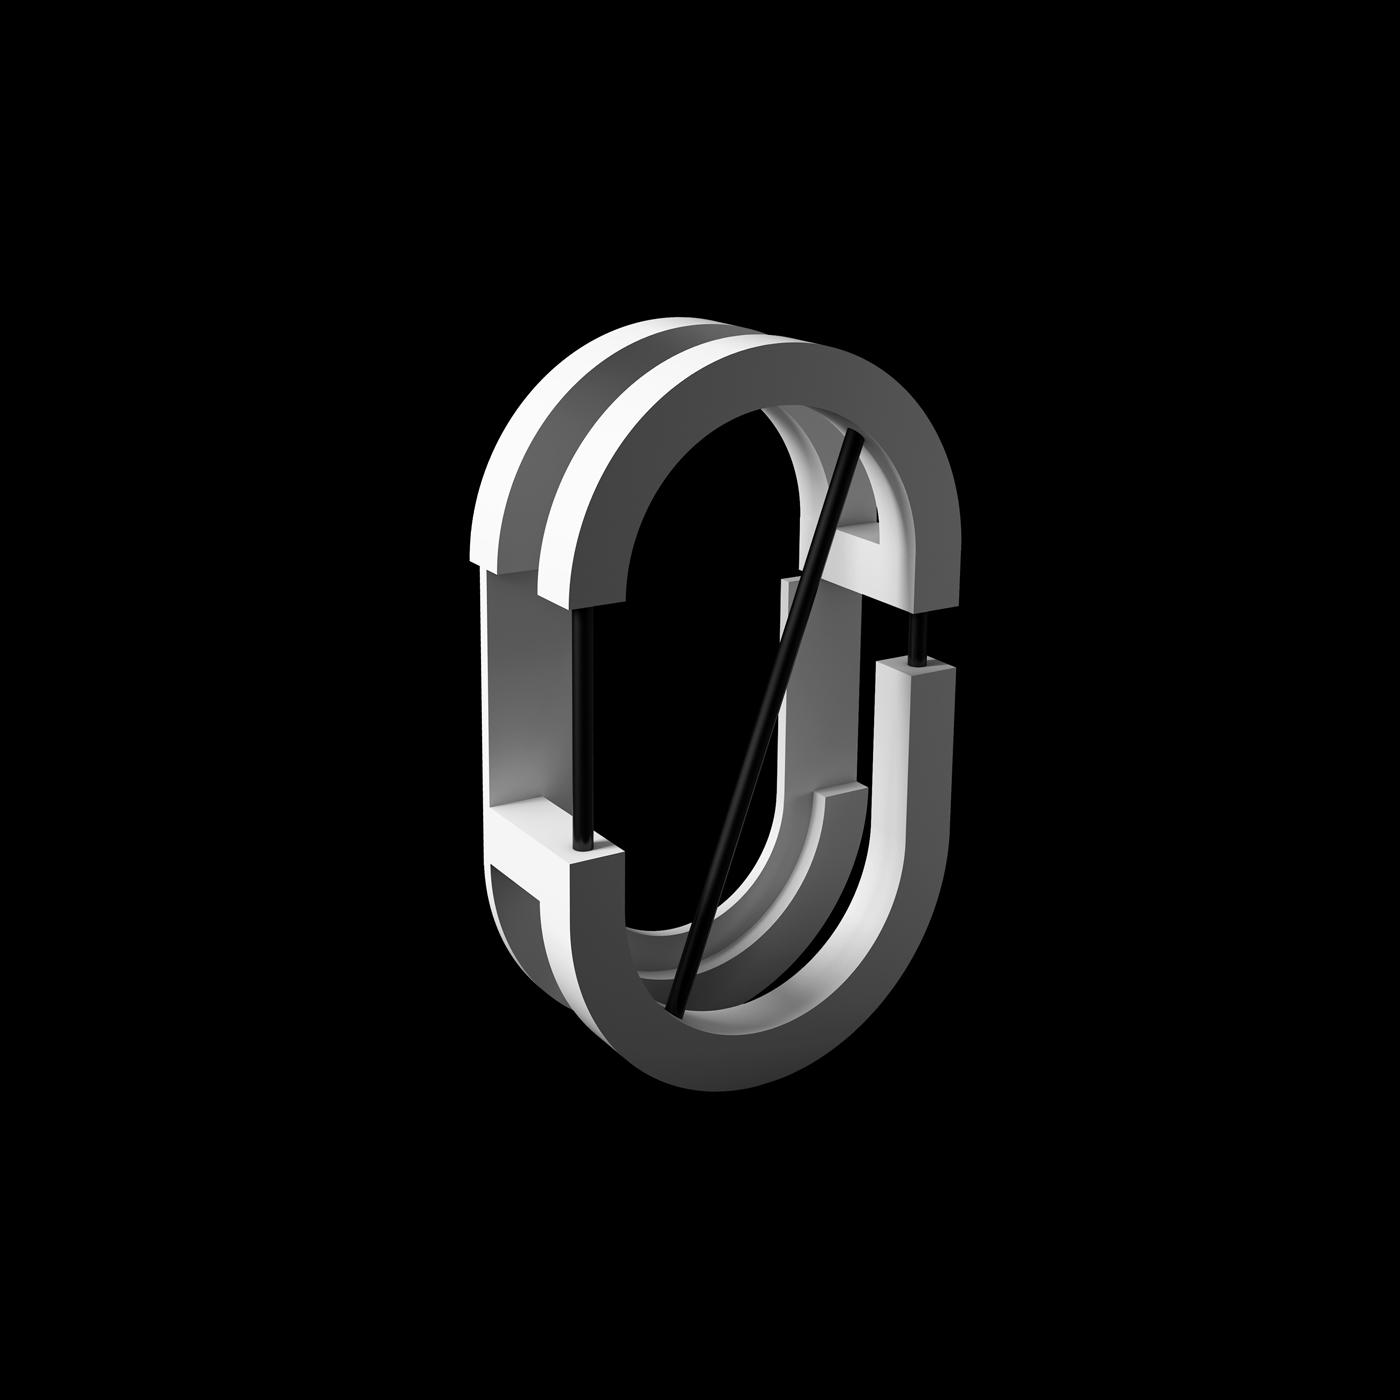 3D numbers lighting technical c4d Render geometric type font poster